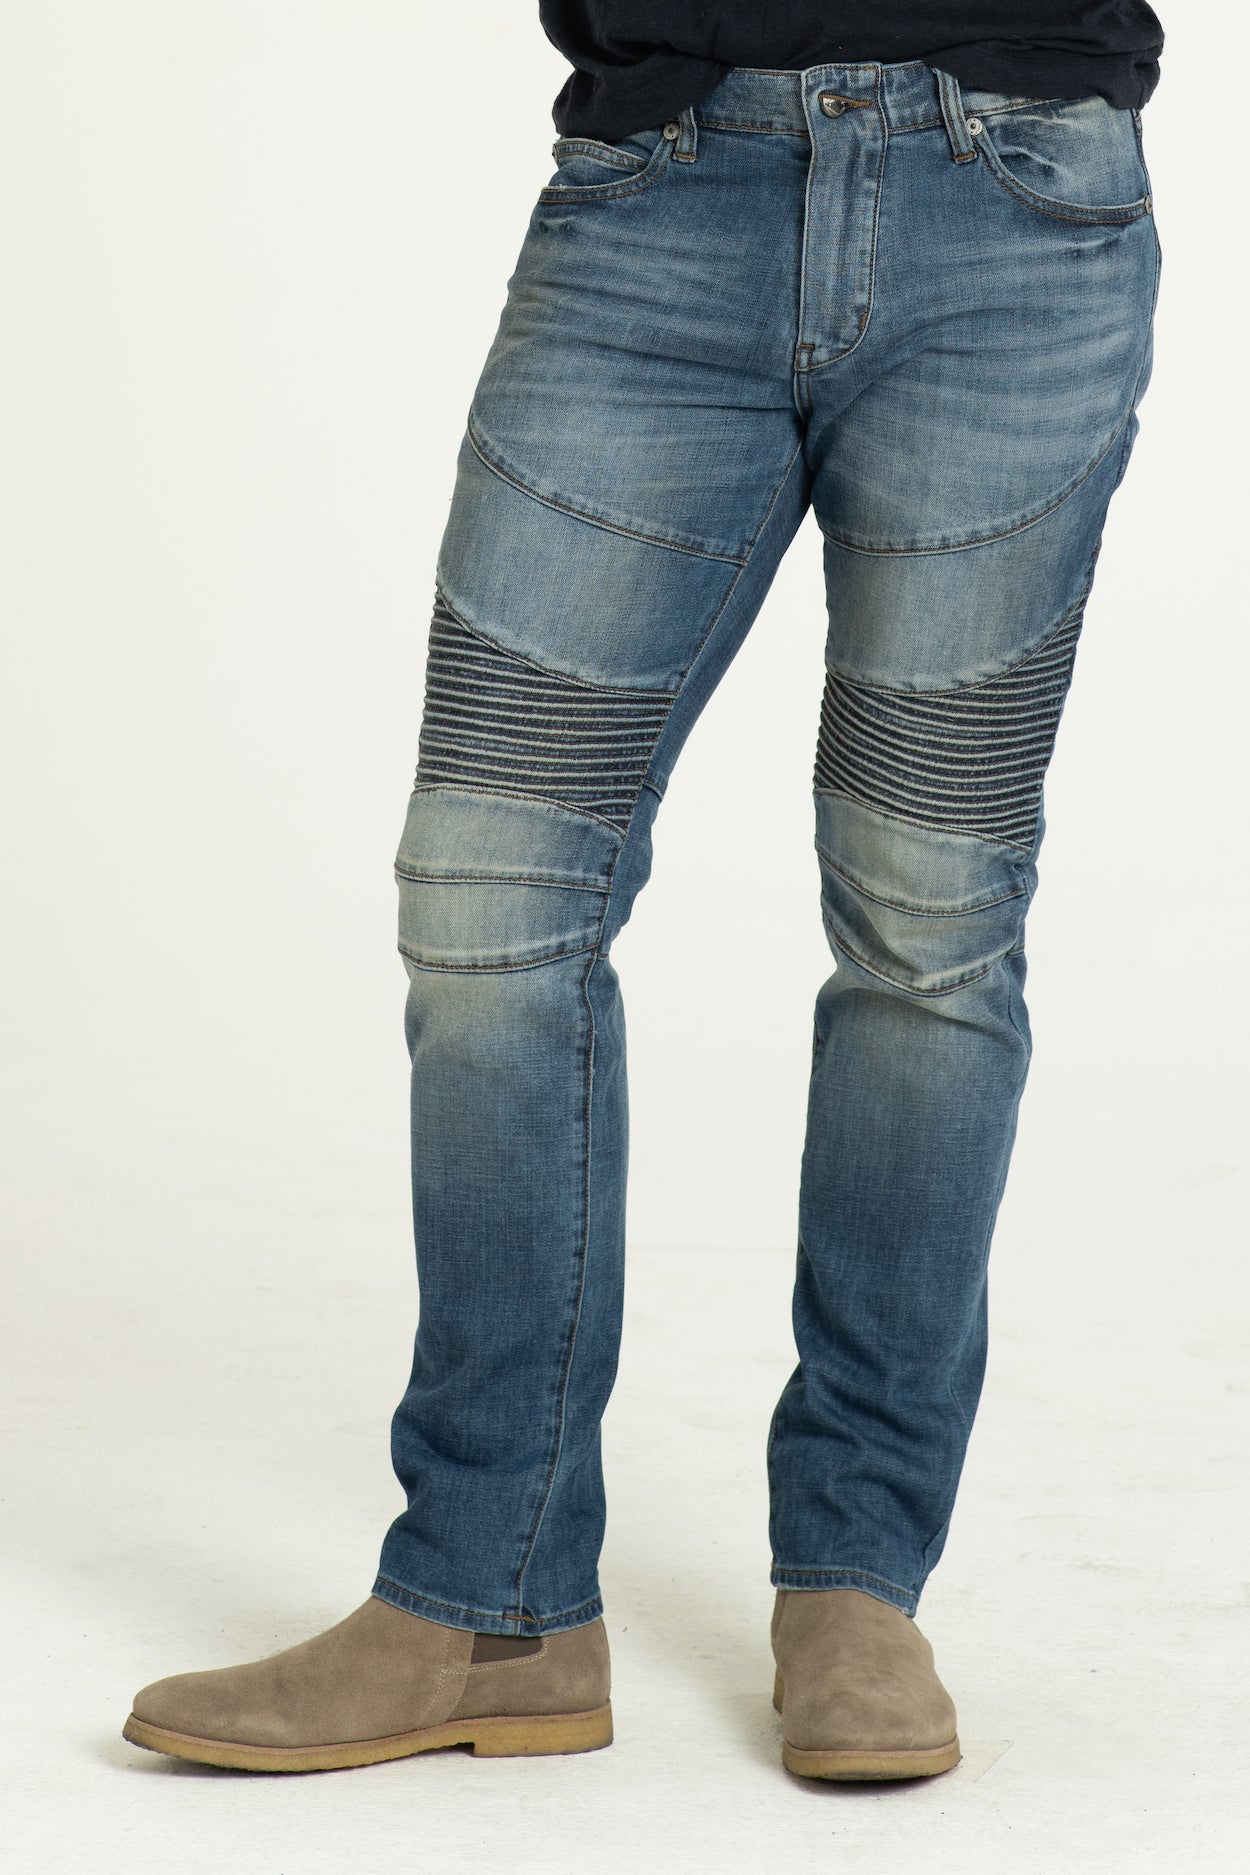 MOTO DENIM PANTS IN WASTED BLUES